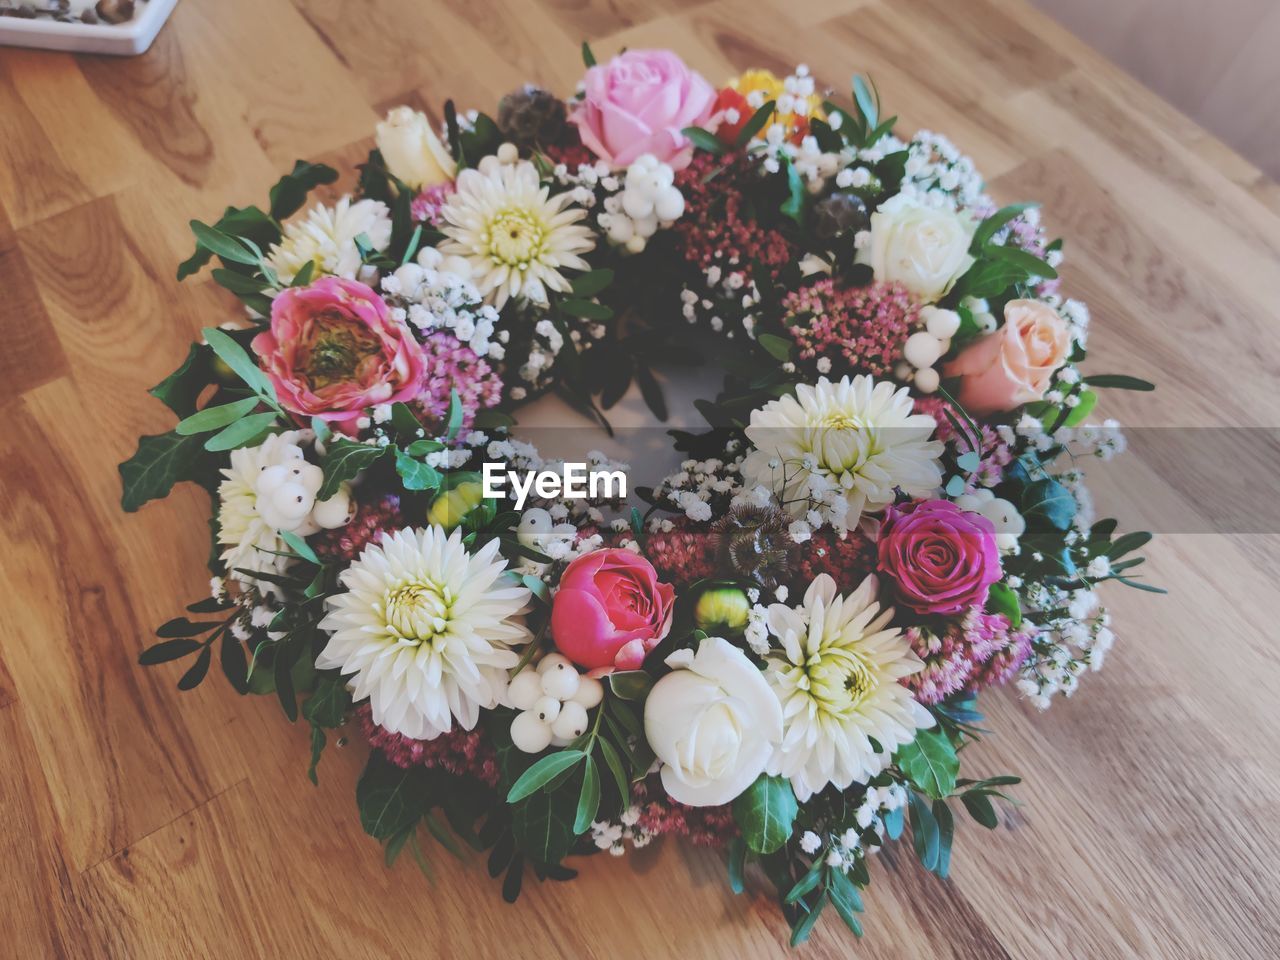 HIGH ANGLE VIEW OF FLOWER BOUQUET ON FLOOR